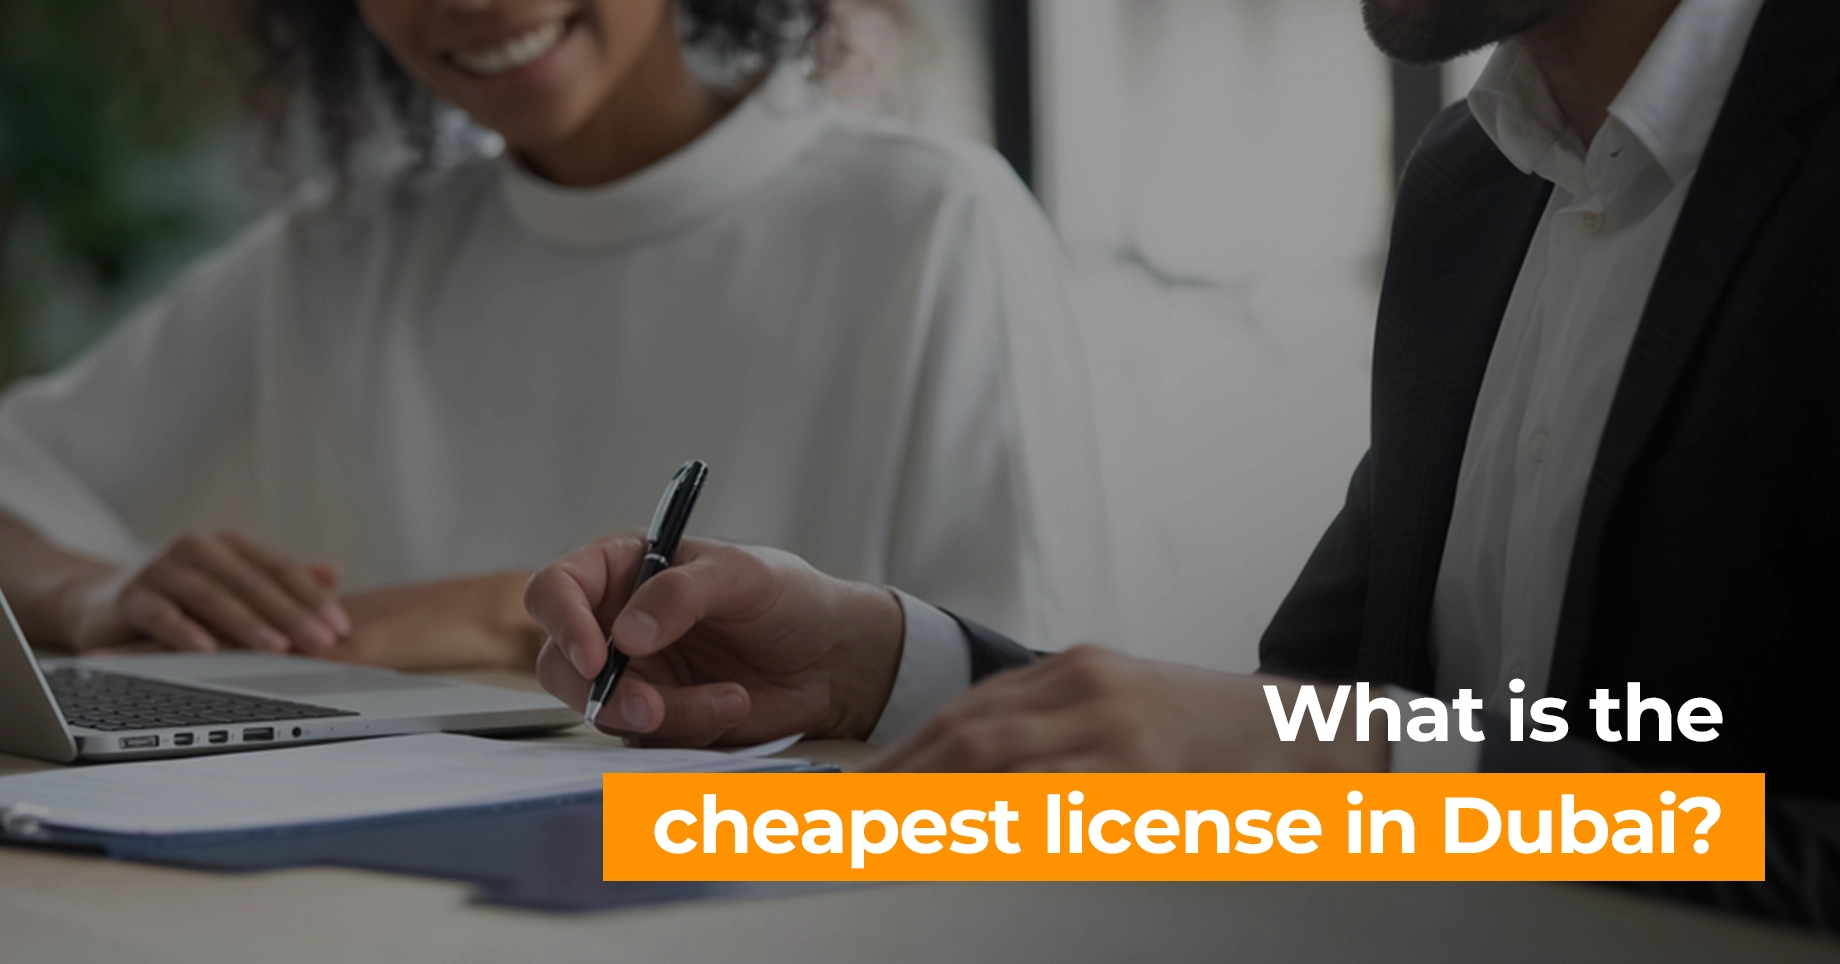 What is the cheapest license in Dubai